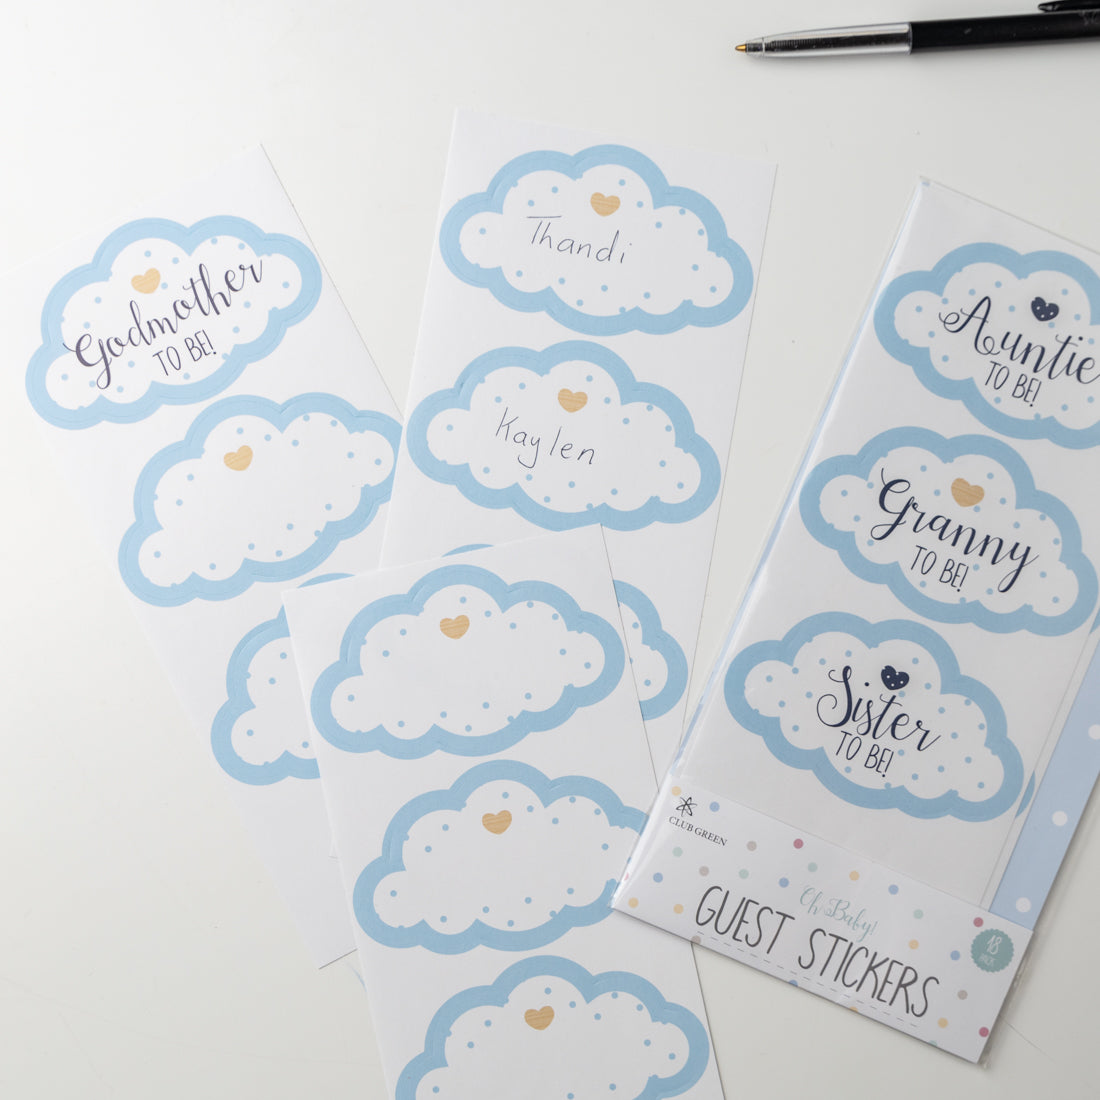 Baby Shower Novelty Guest Stickers (pink/blue/green)